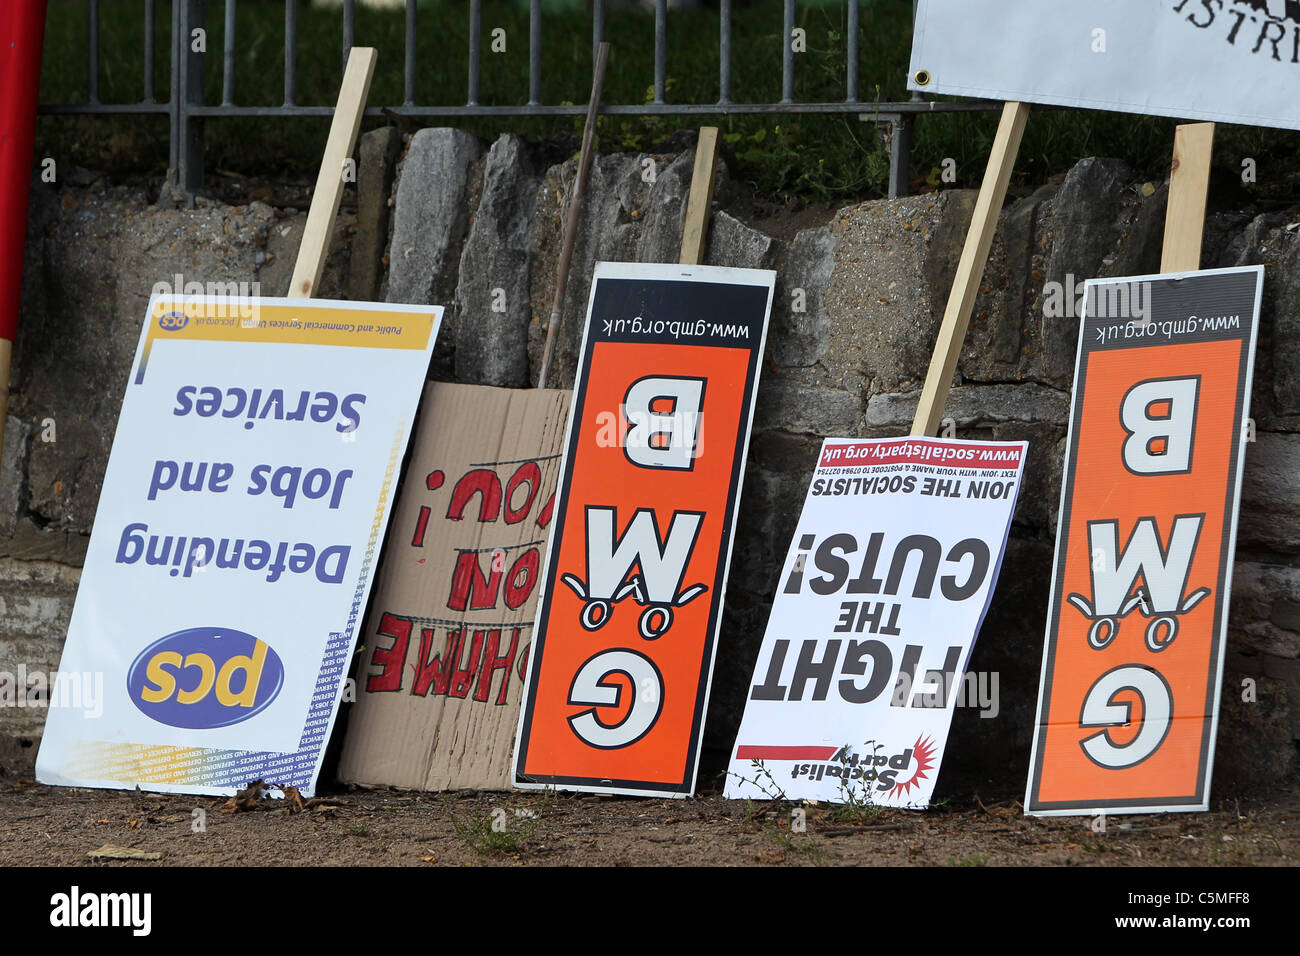 Protest boards and placards waiting to be used at a protest on Government cuts in Brighton, East Sussex, UK. Stock Photo